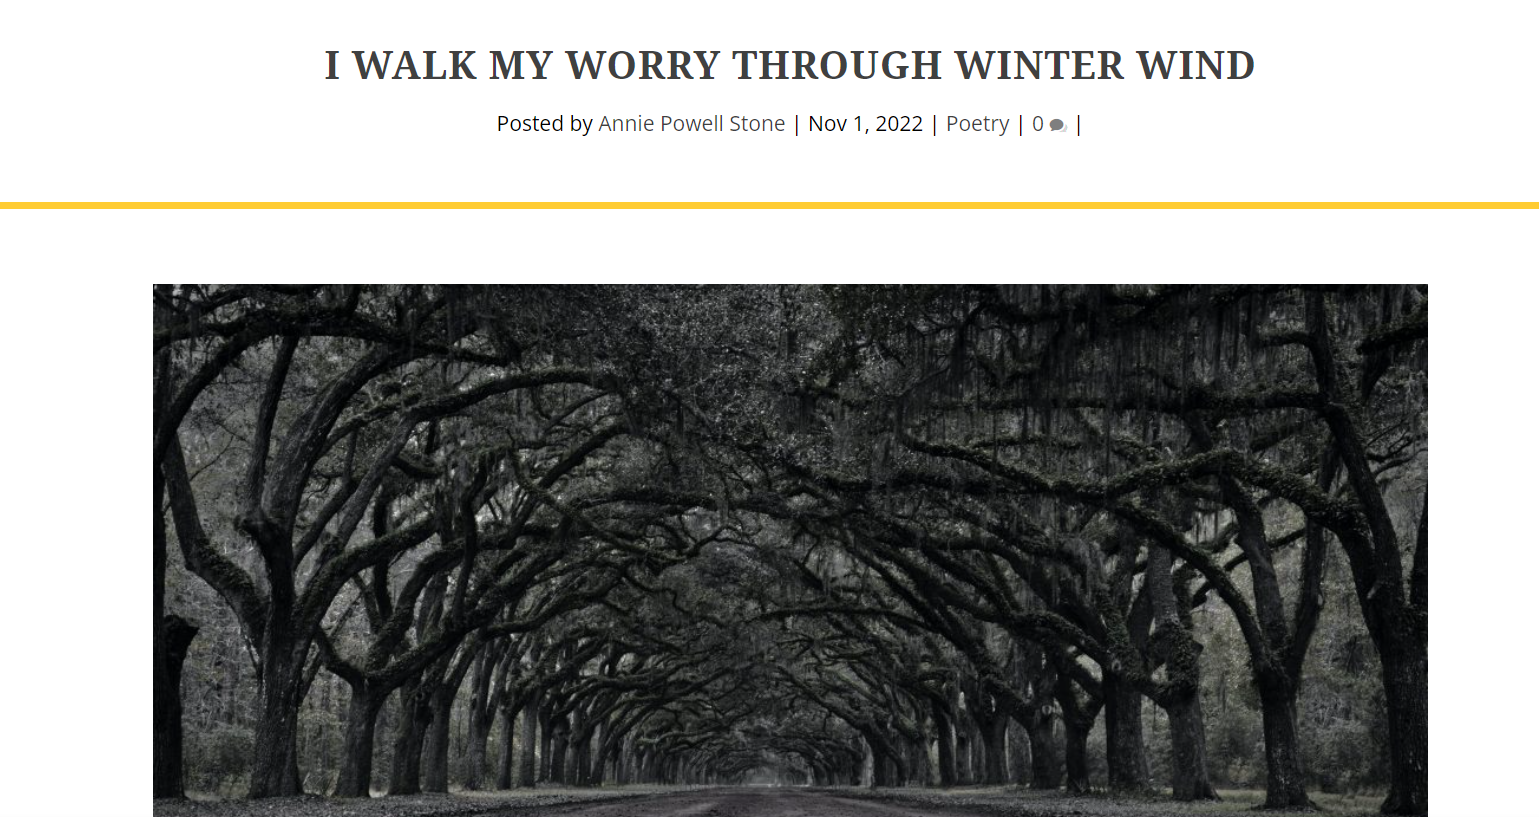 *nominated for a Pushcart Prize* "I walk my worry through winter wind"